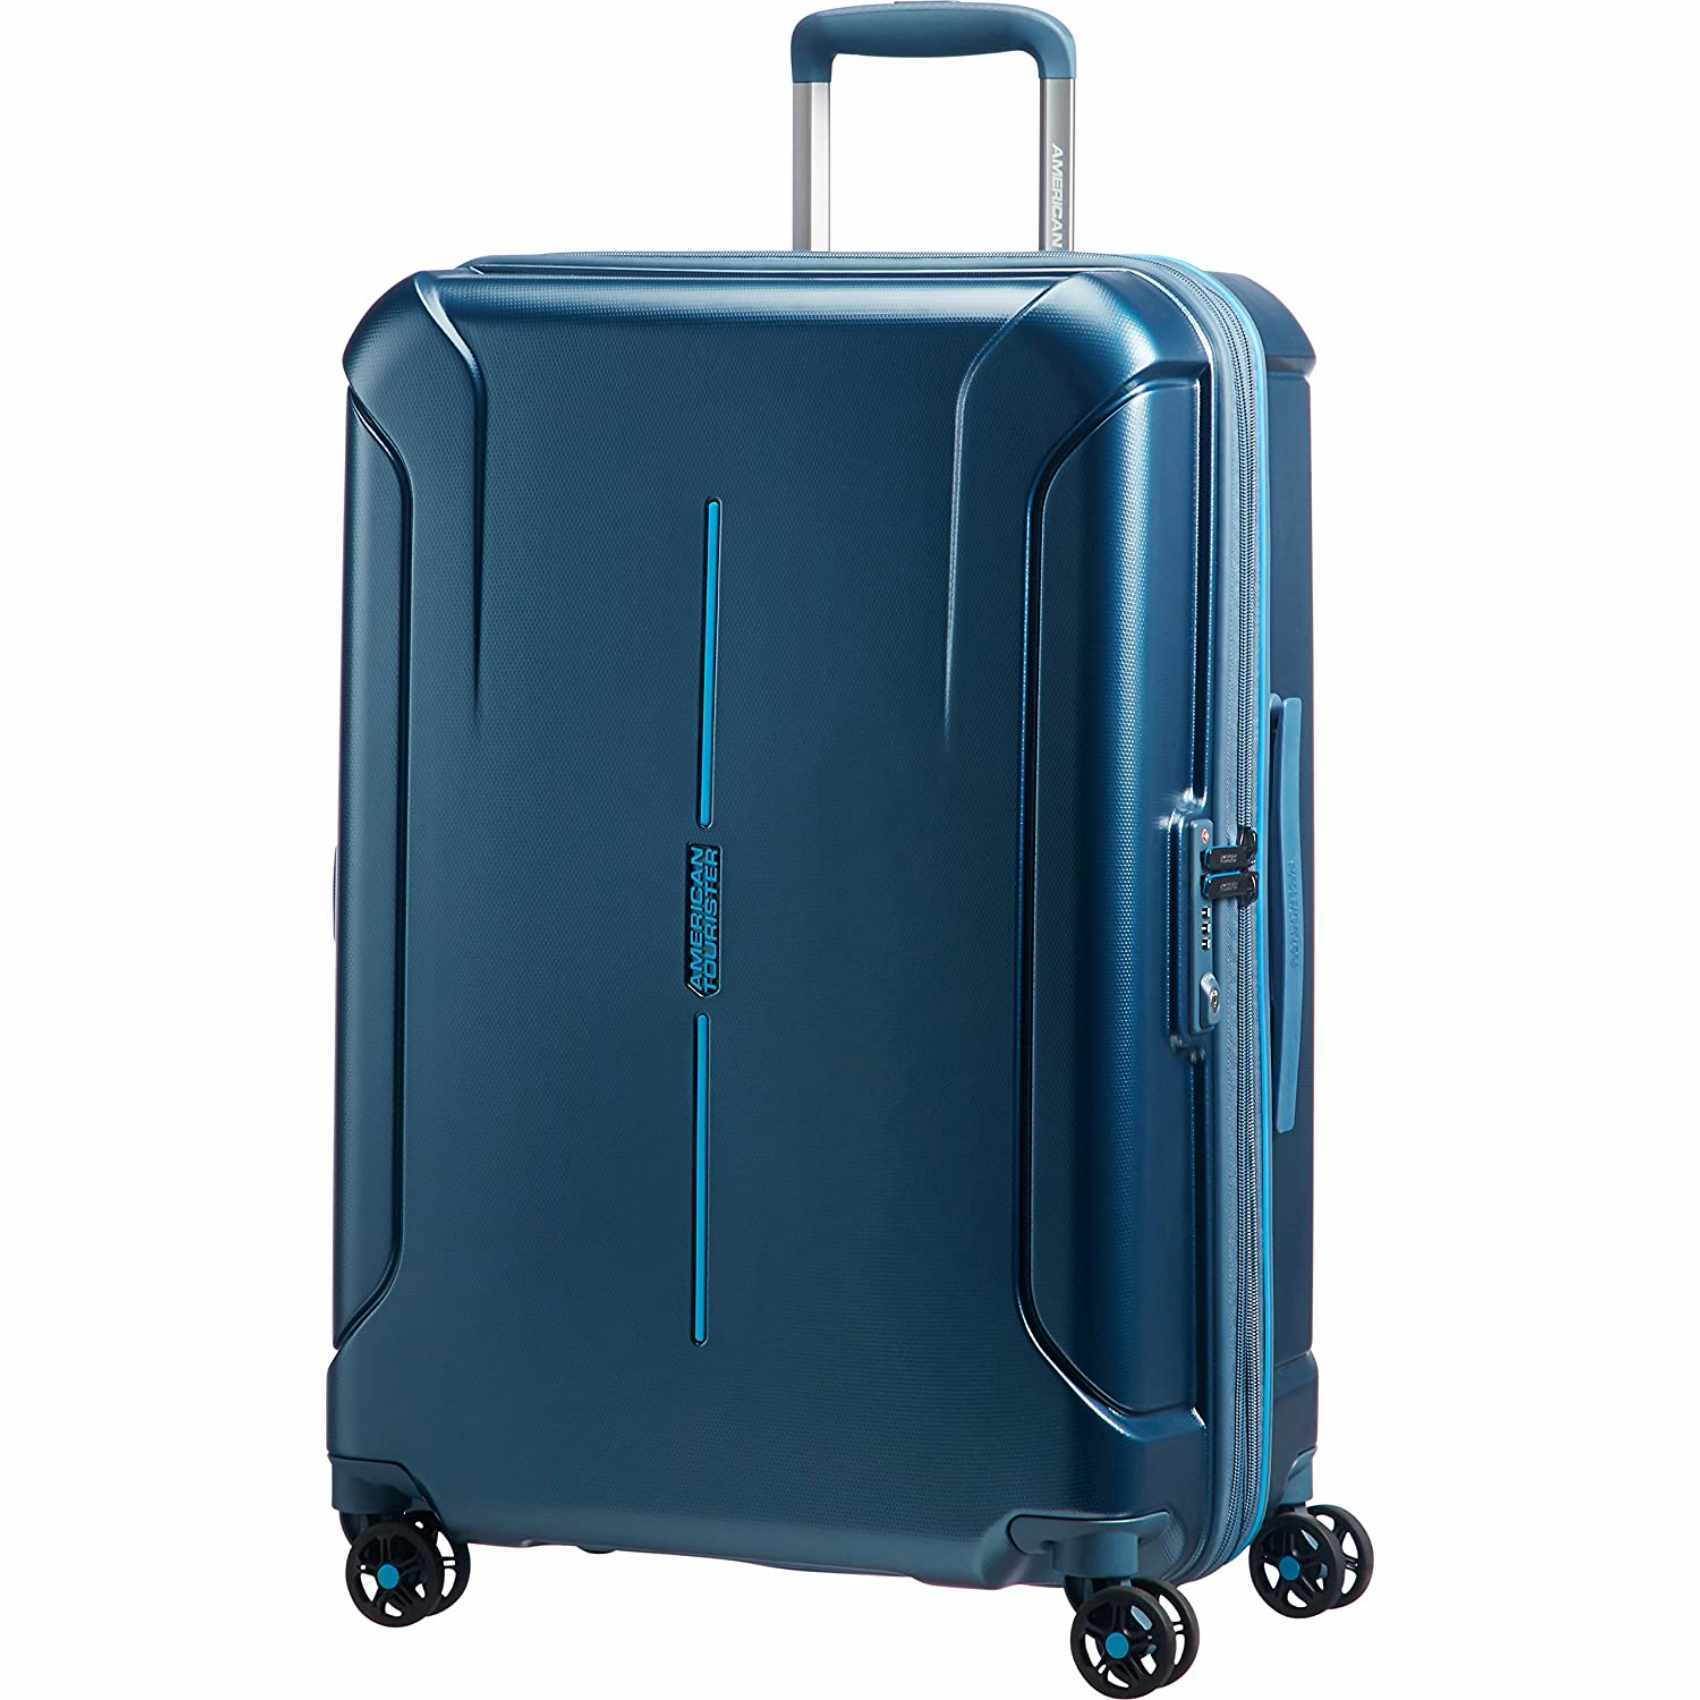 Buy American Tourister Technum Online - Shop Fashion, Accessories & Luggage on Carrefour UAE